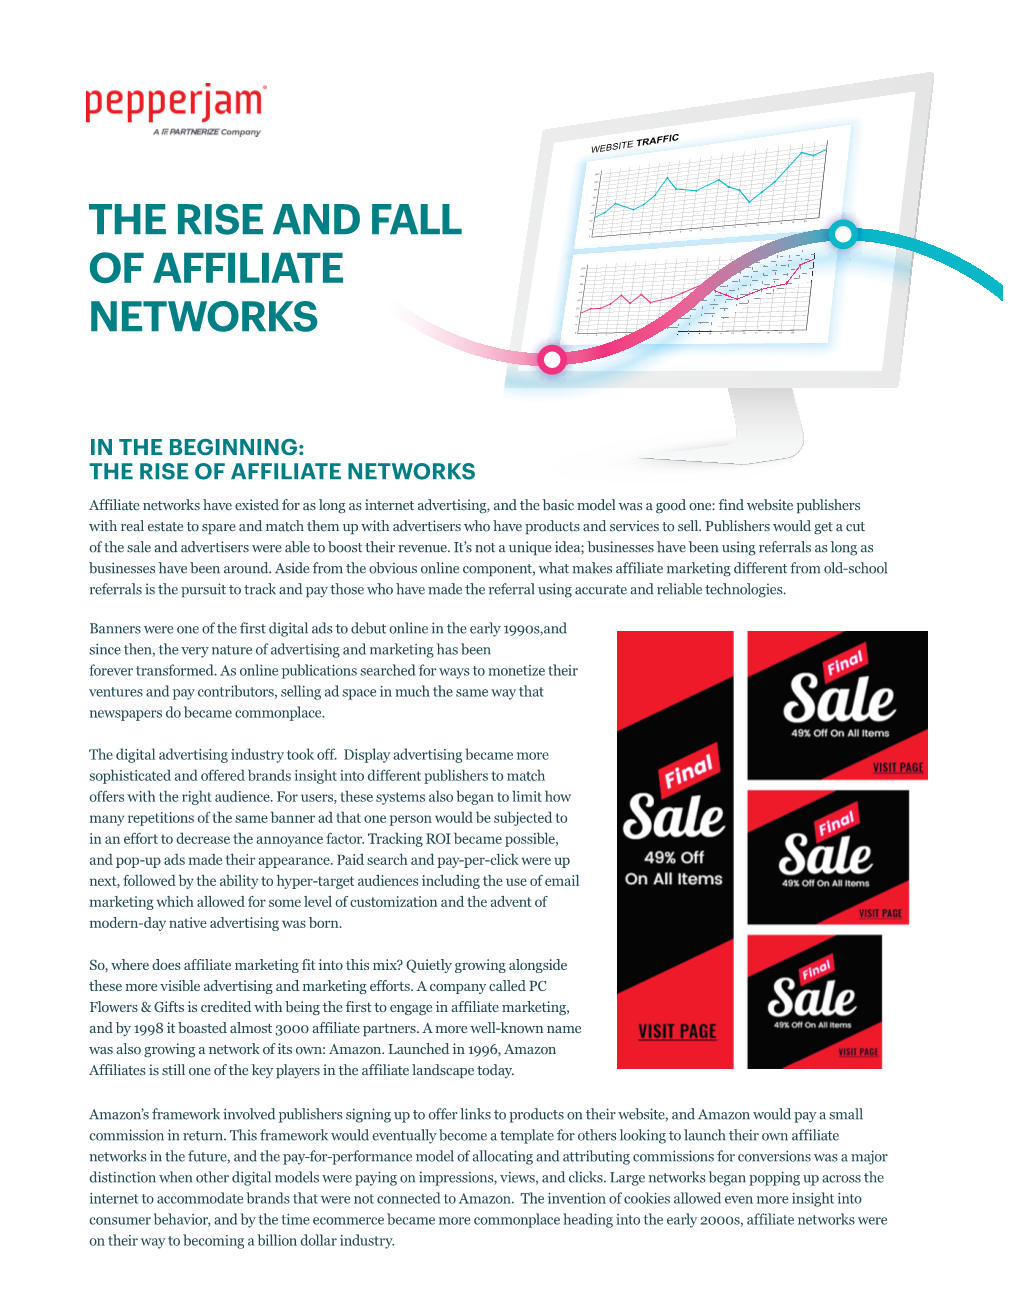 The Rise and Fall of Affiliate Networks